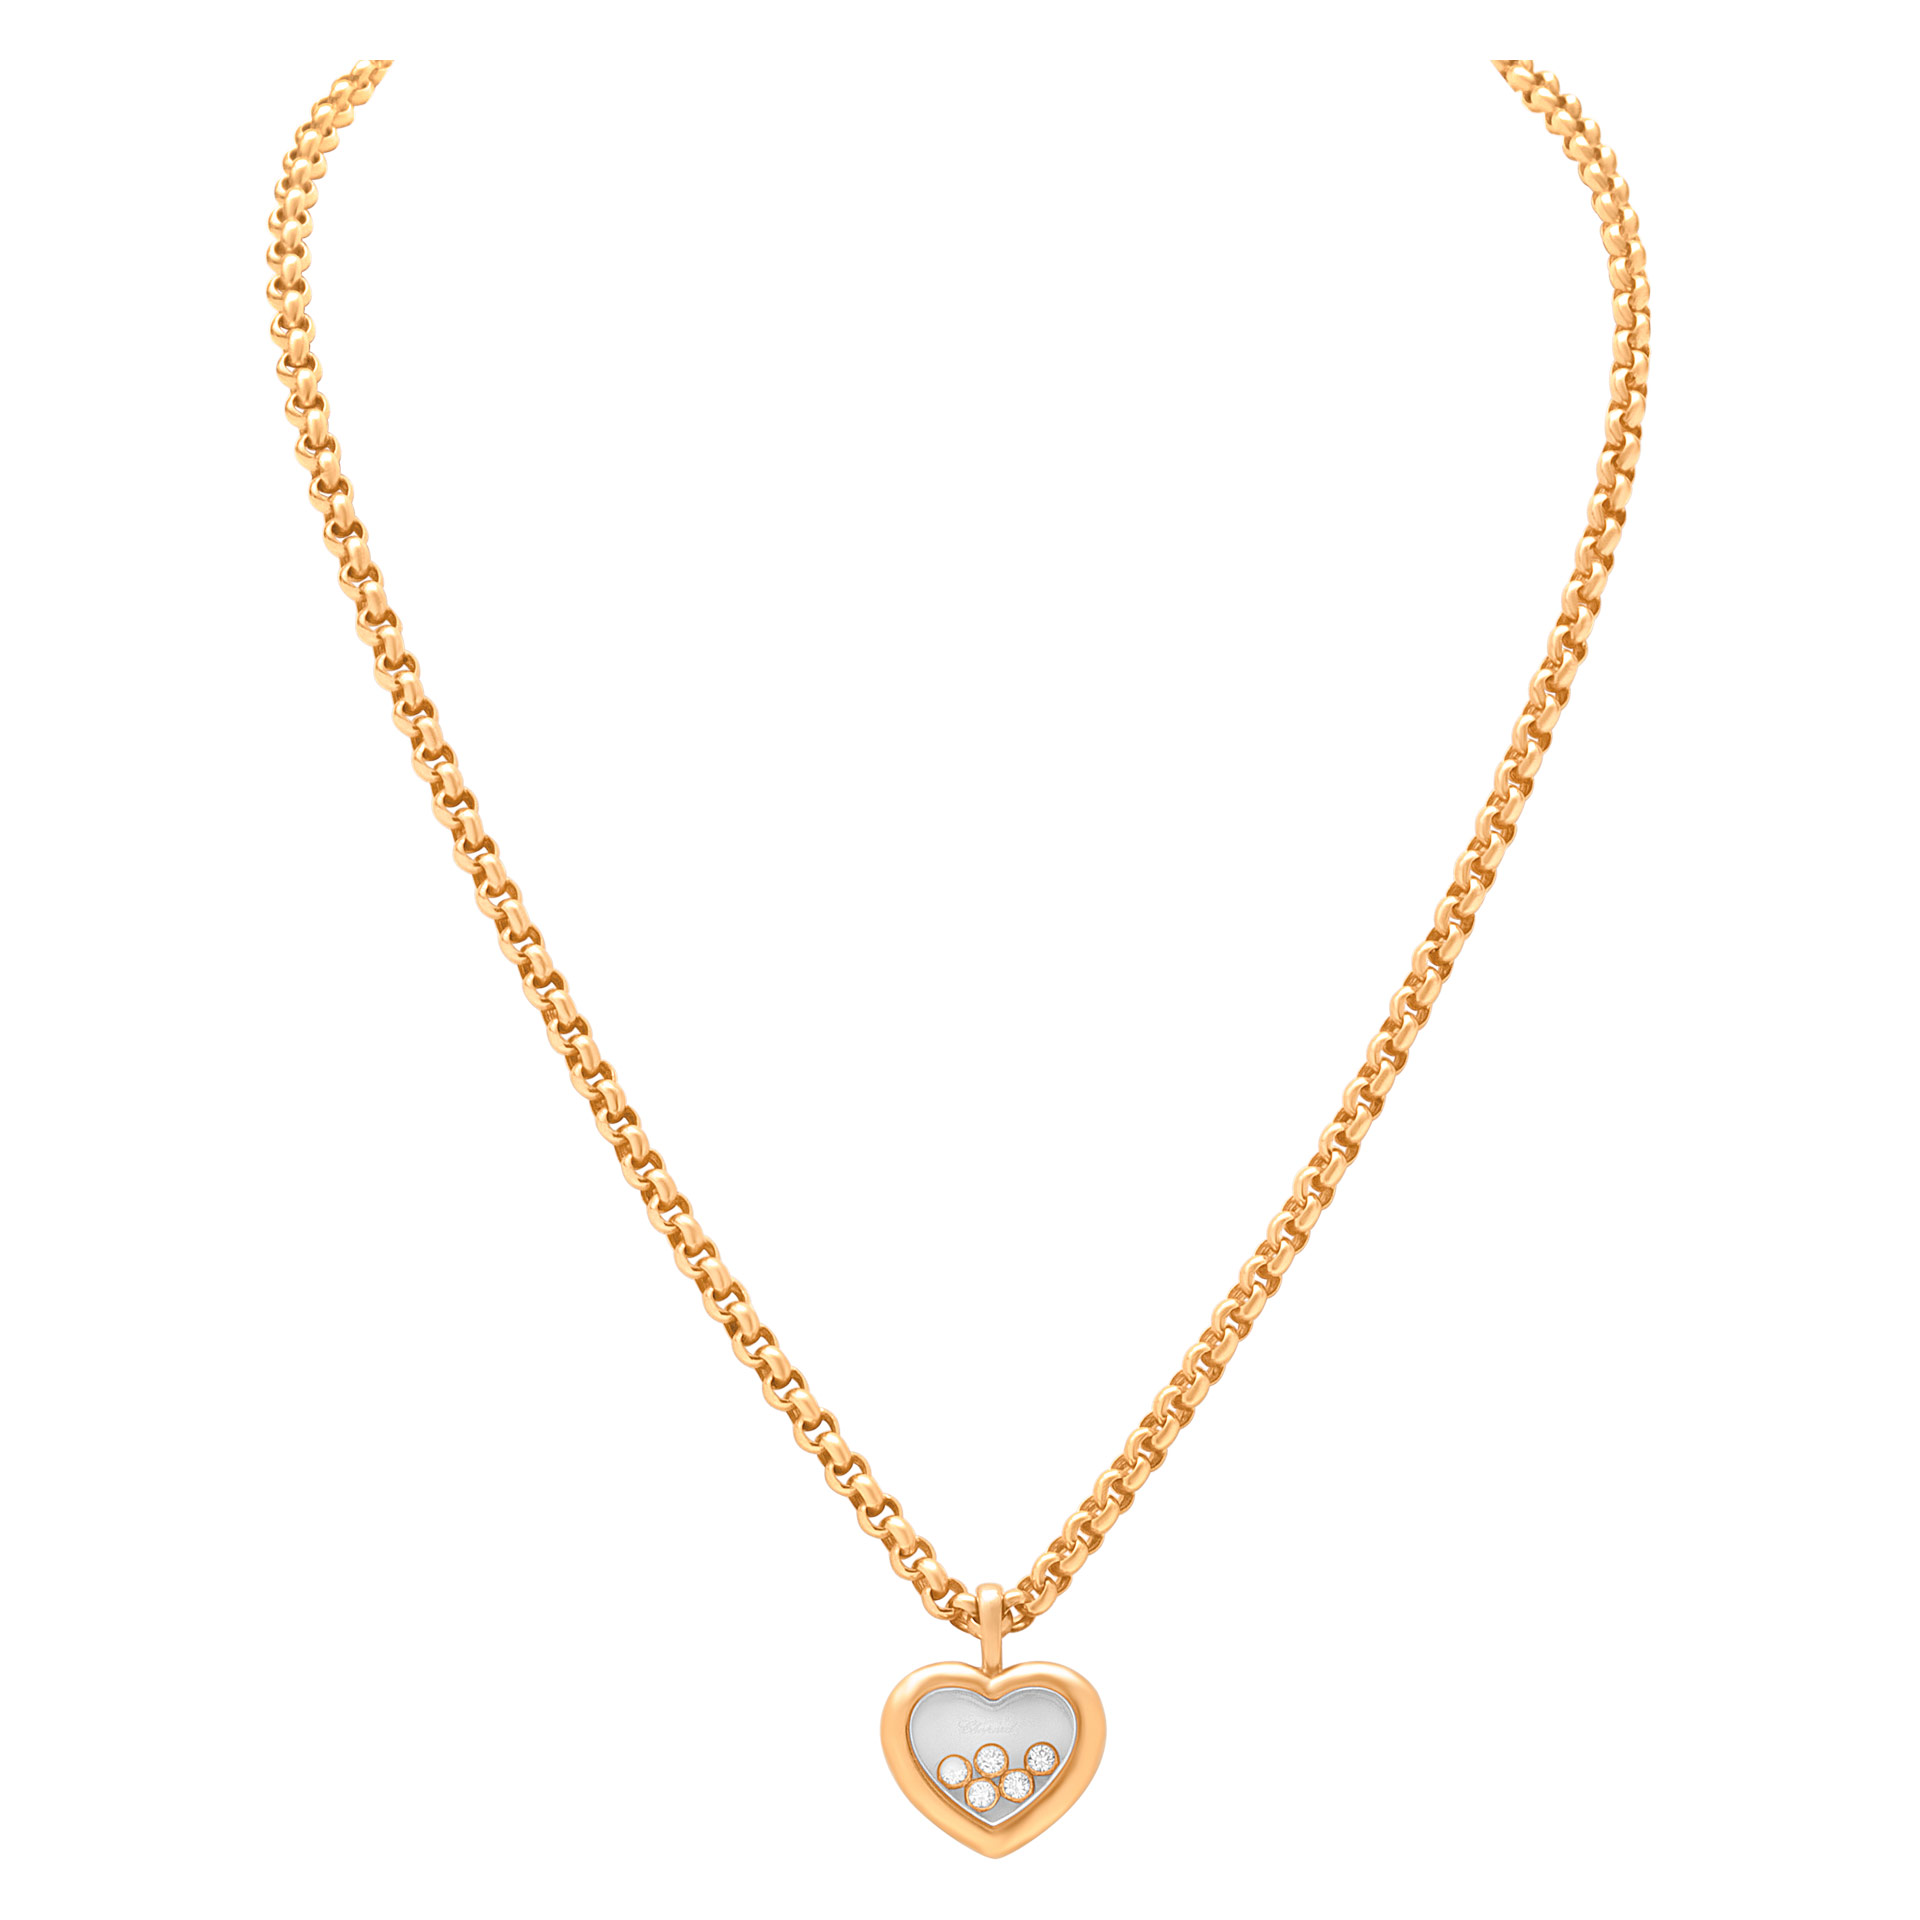 Chopard Happy Diamond Heart pendant necklace with 5 floating diamonds on Rolo link chain, 0.28 cts